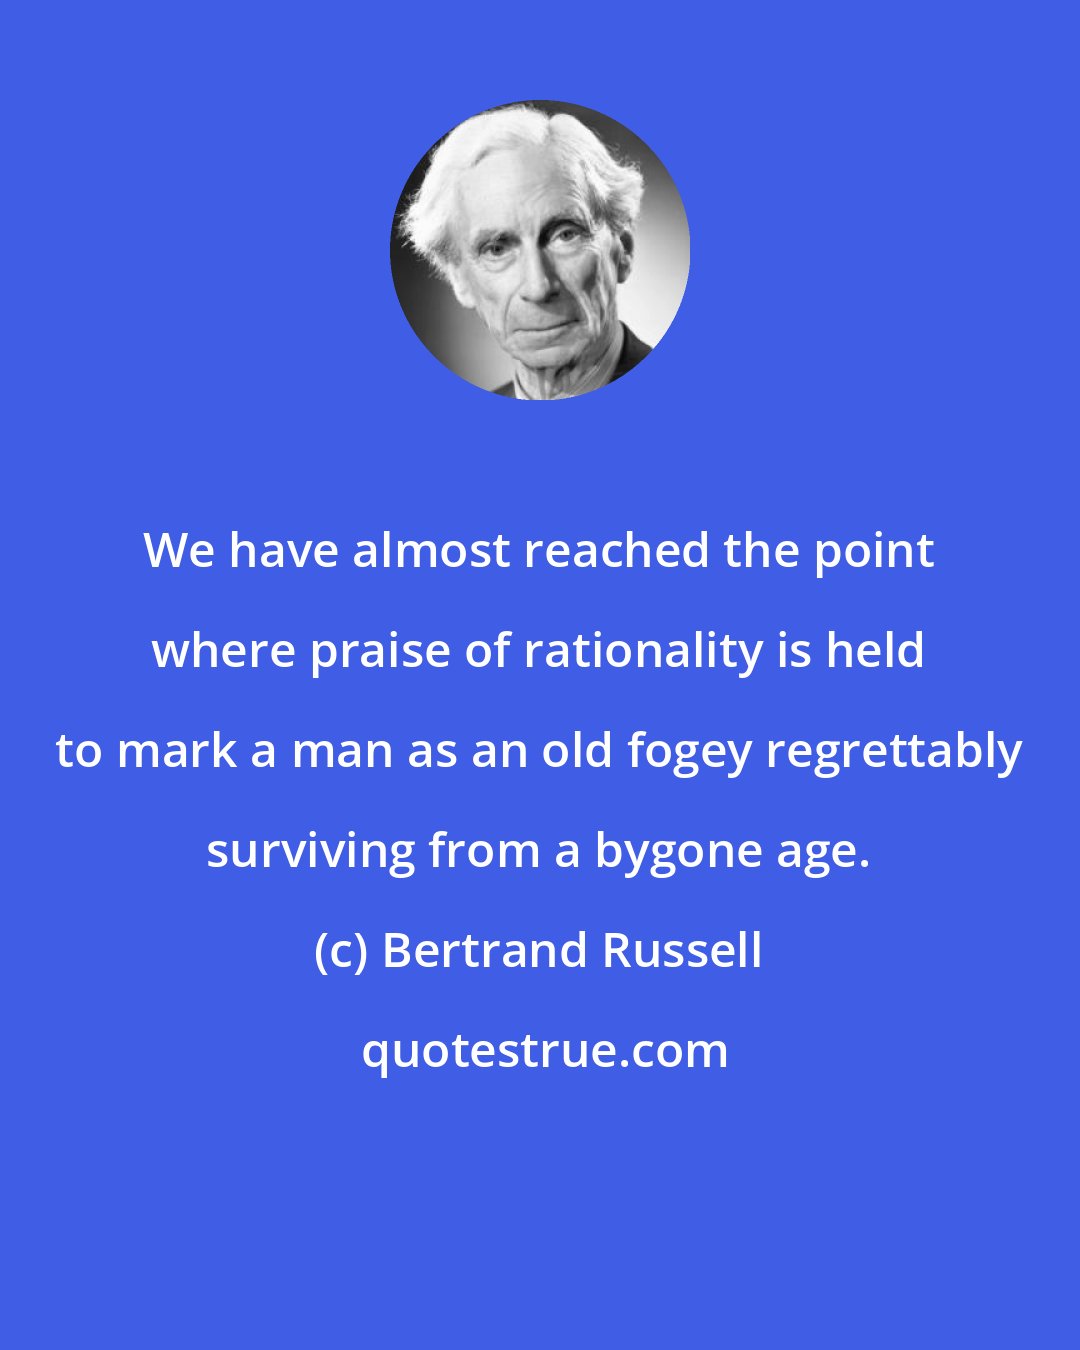 Bertrand Russell: We have almost reached the point where praise of rationality is held to mark a man as an old fogey regrettably surviving from a bygone age.